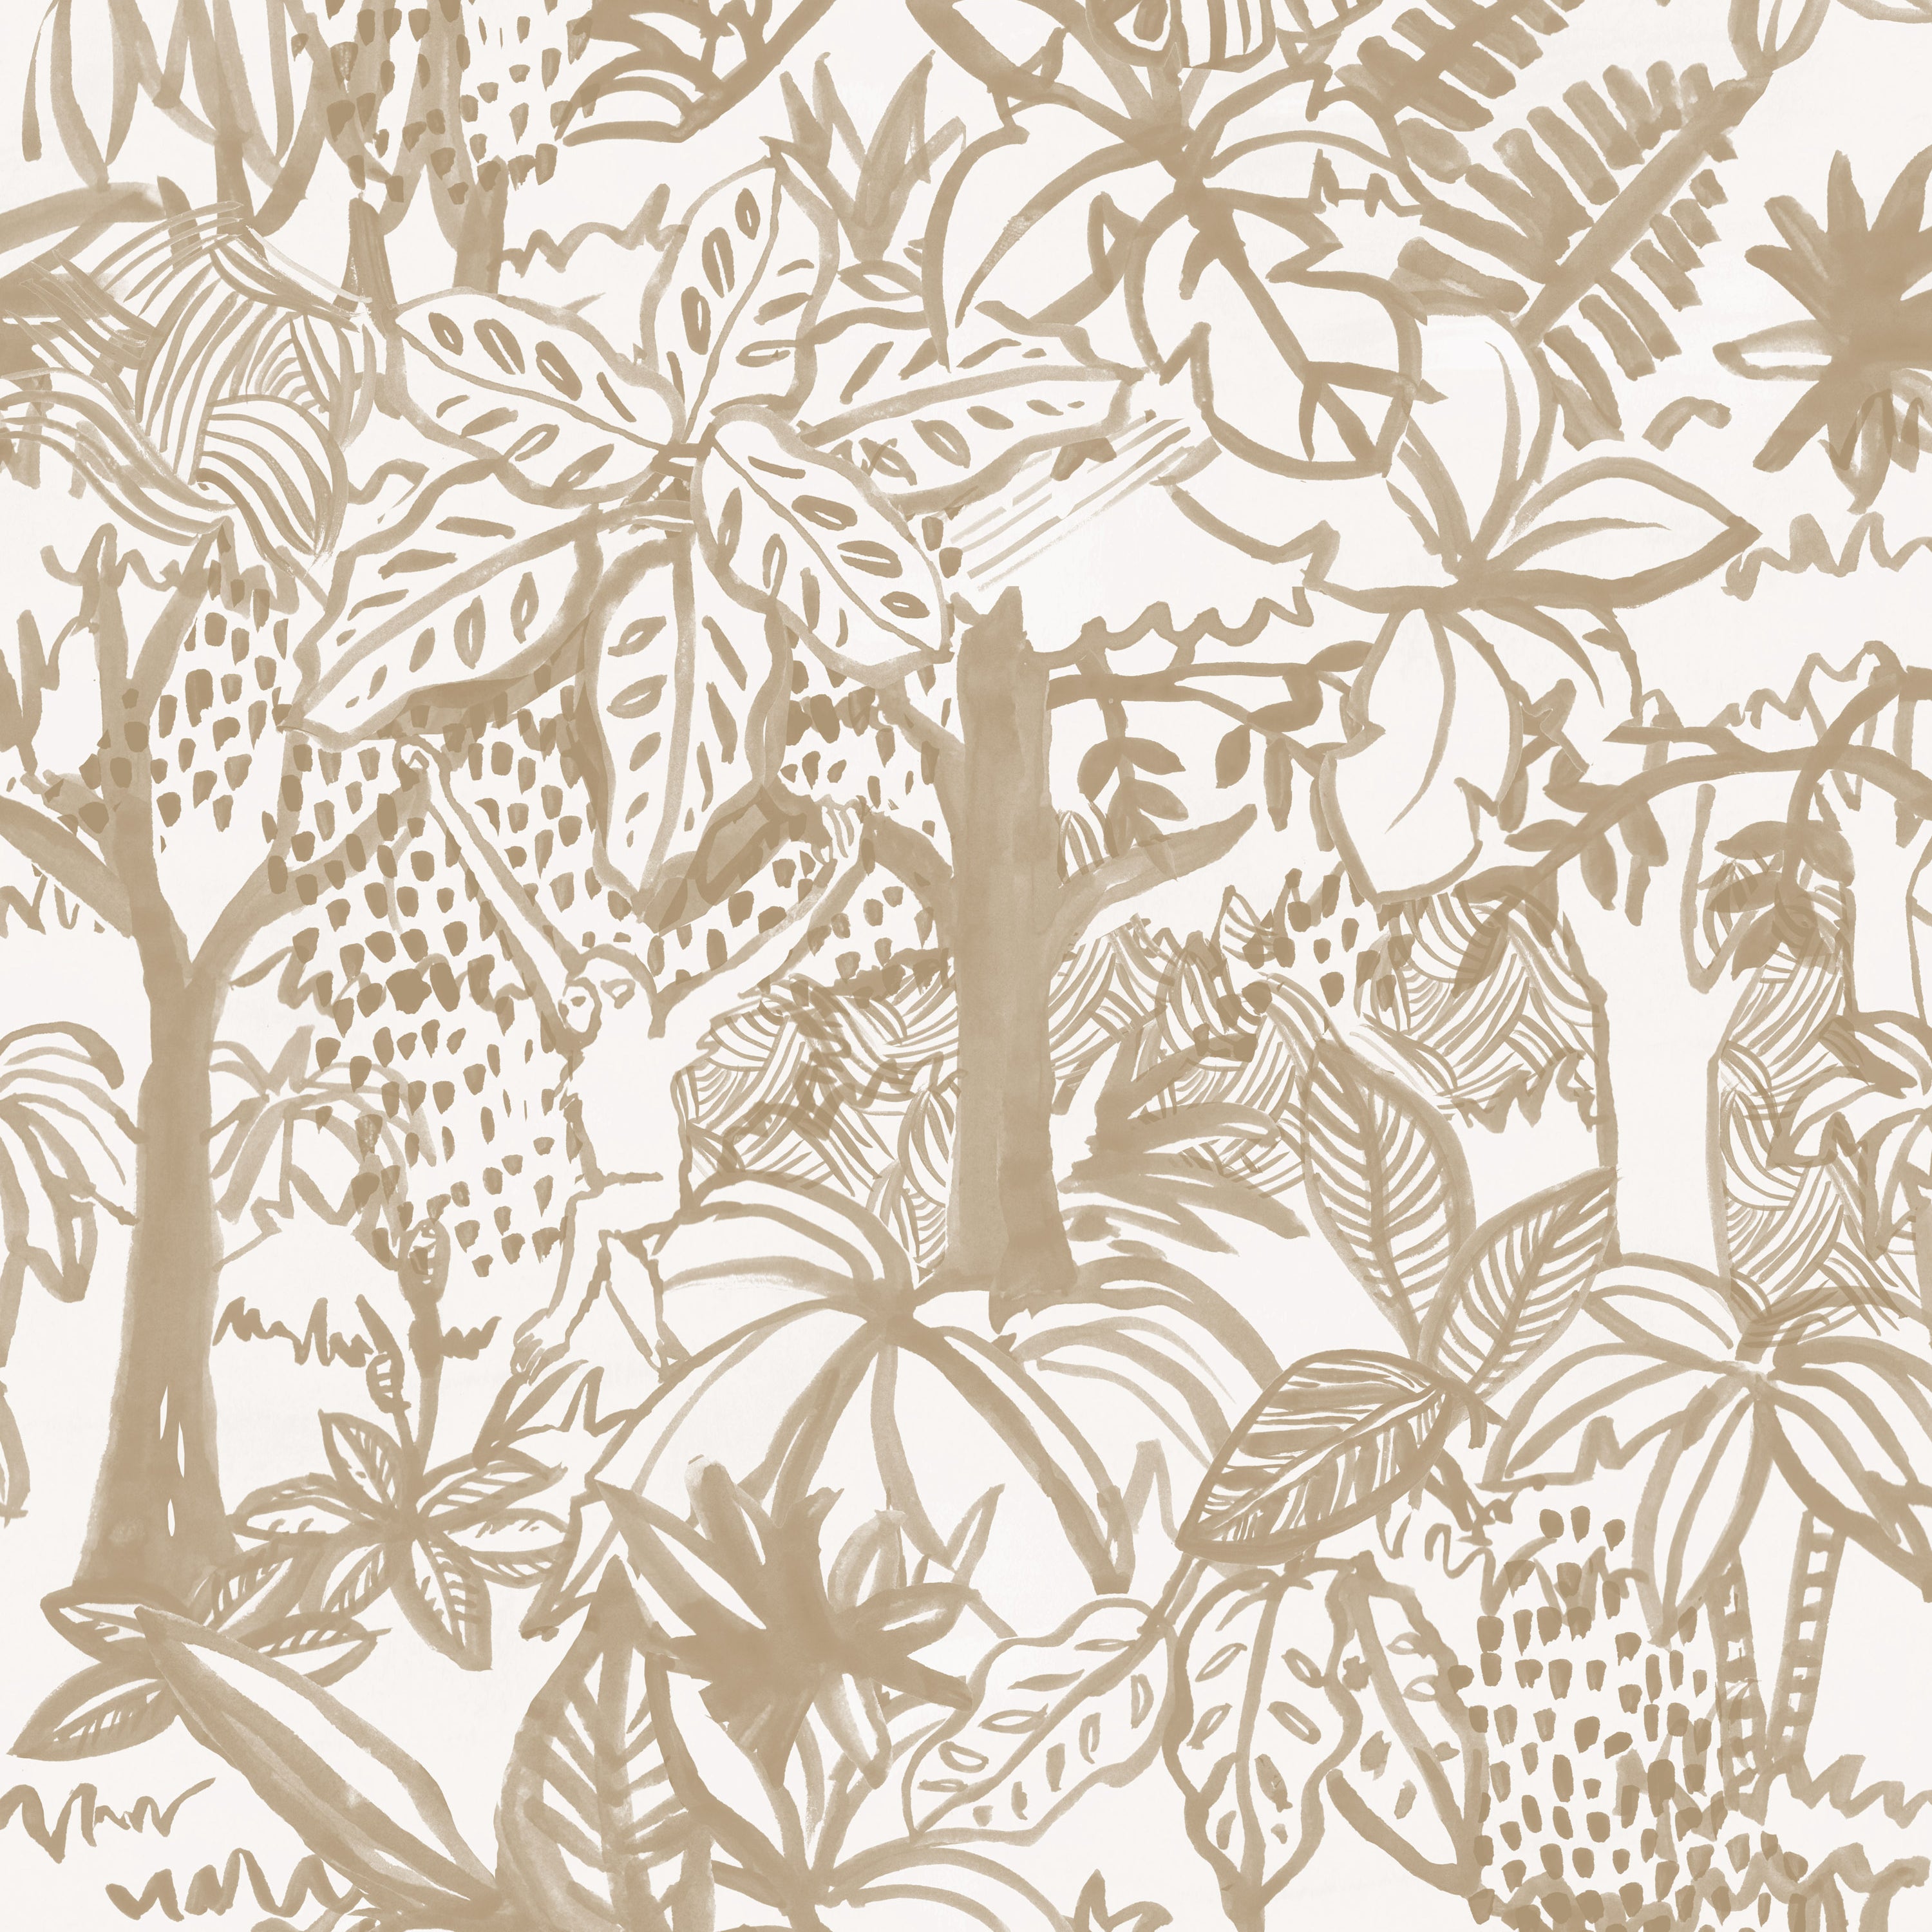 Detail of wallpaper in a playful jungle print in tan on a cream field.